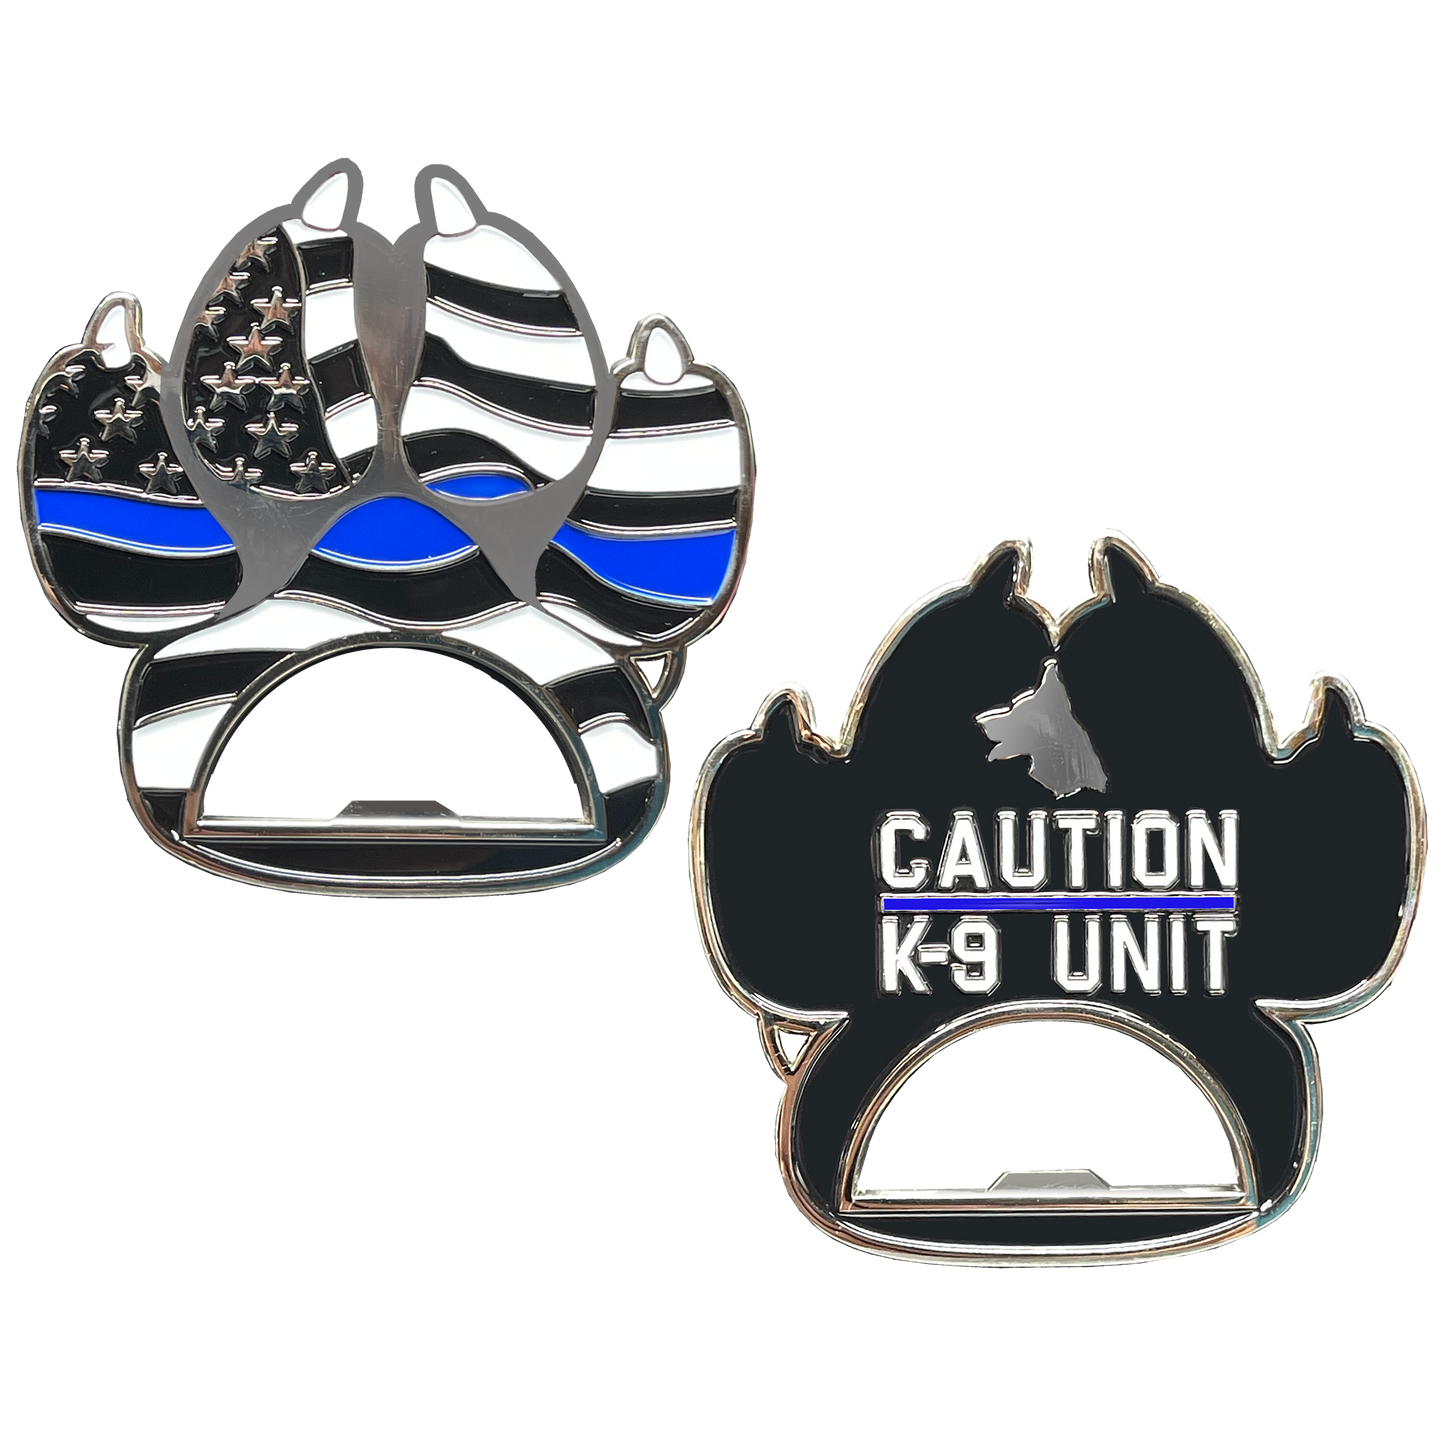 BL15-011 Thin Blue Line Police Canine K9 unit paw bottle opener challenge coin